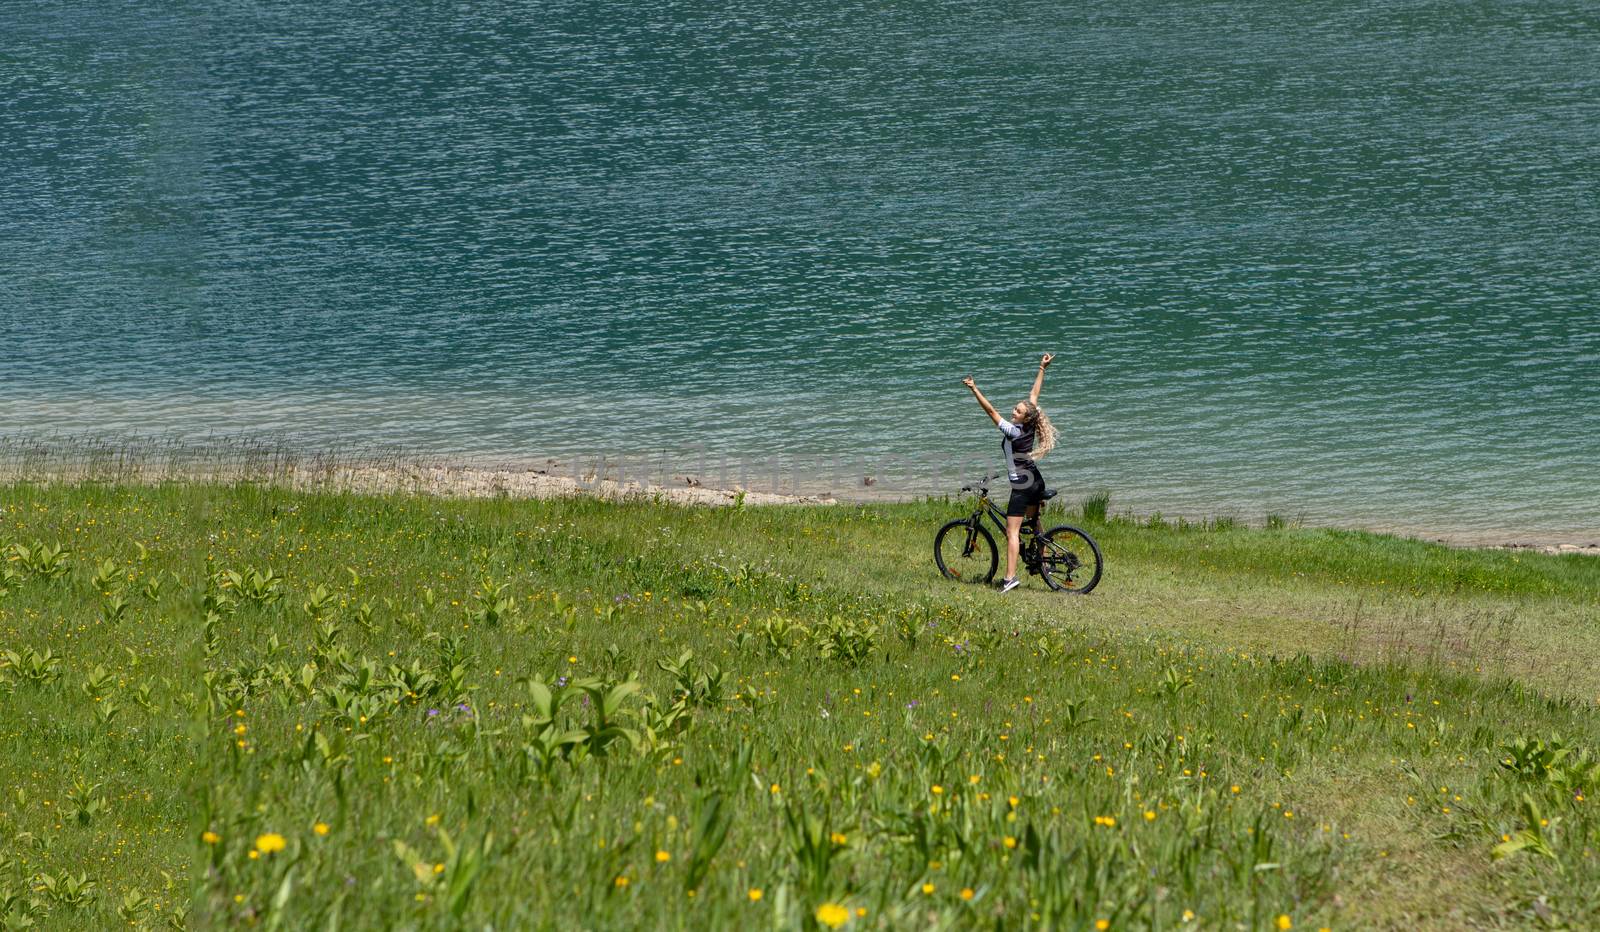 Life style woman with long blond hair on mountain bike in Swiss by PeterHofstetter